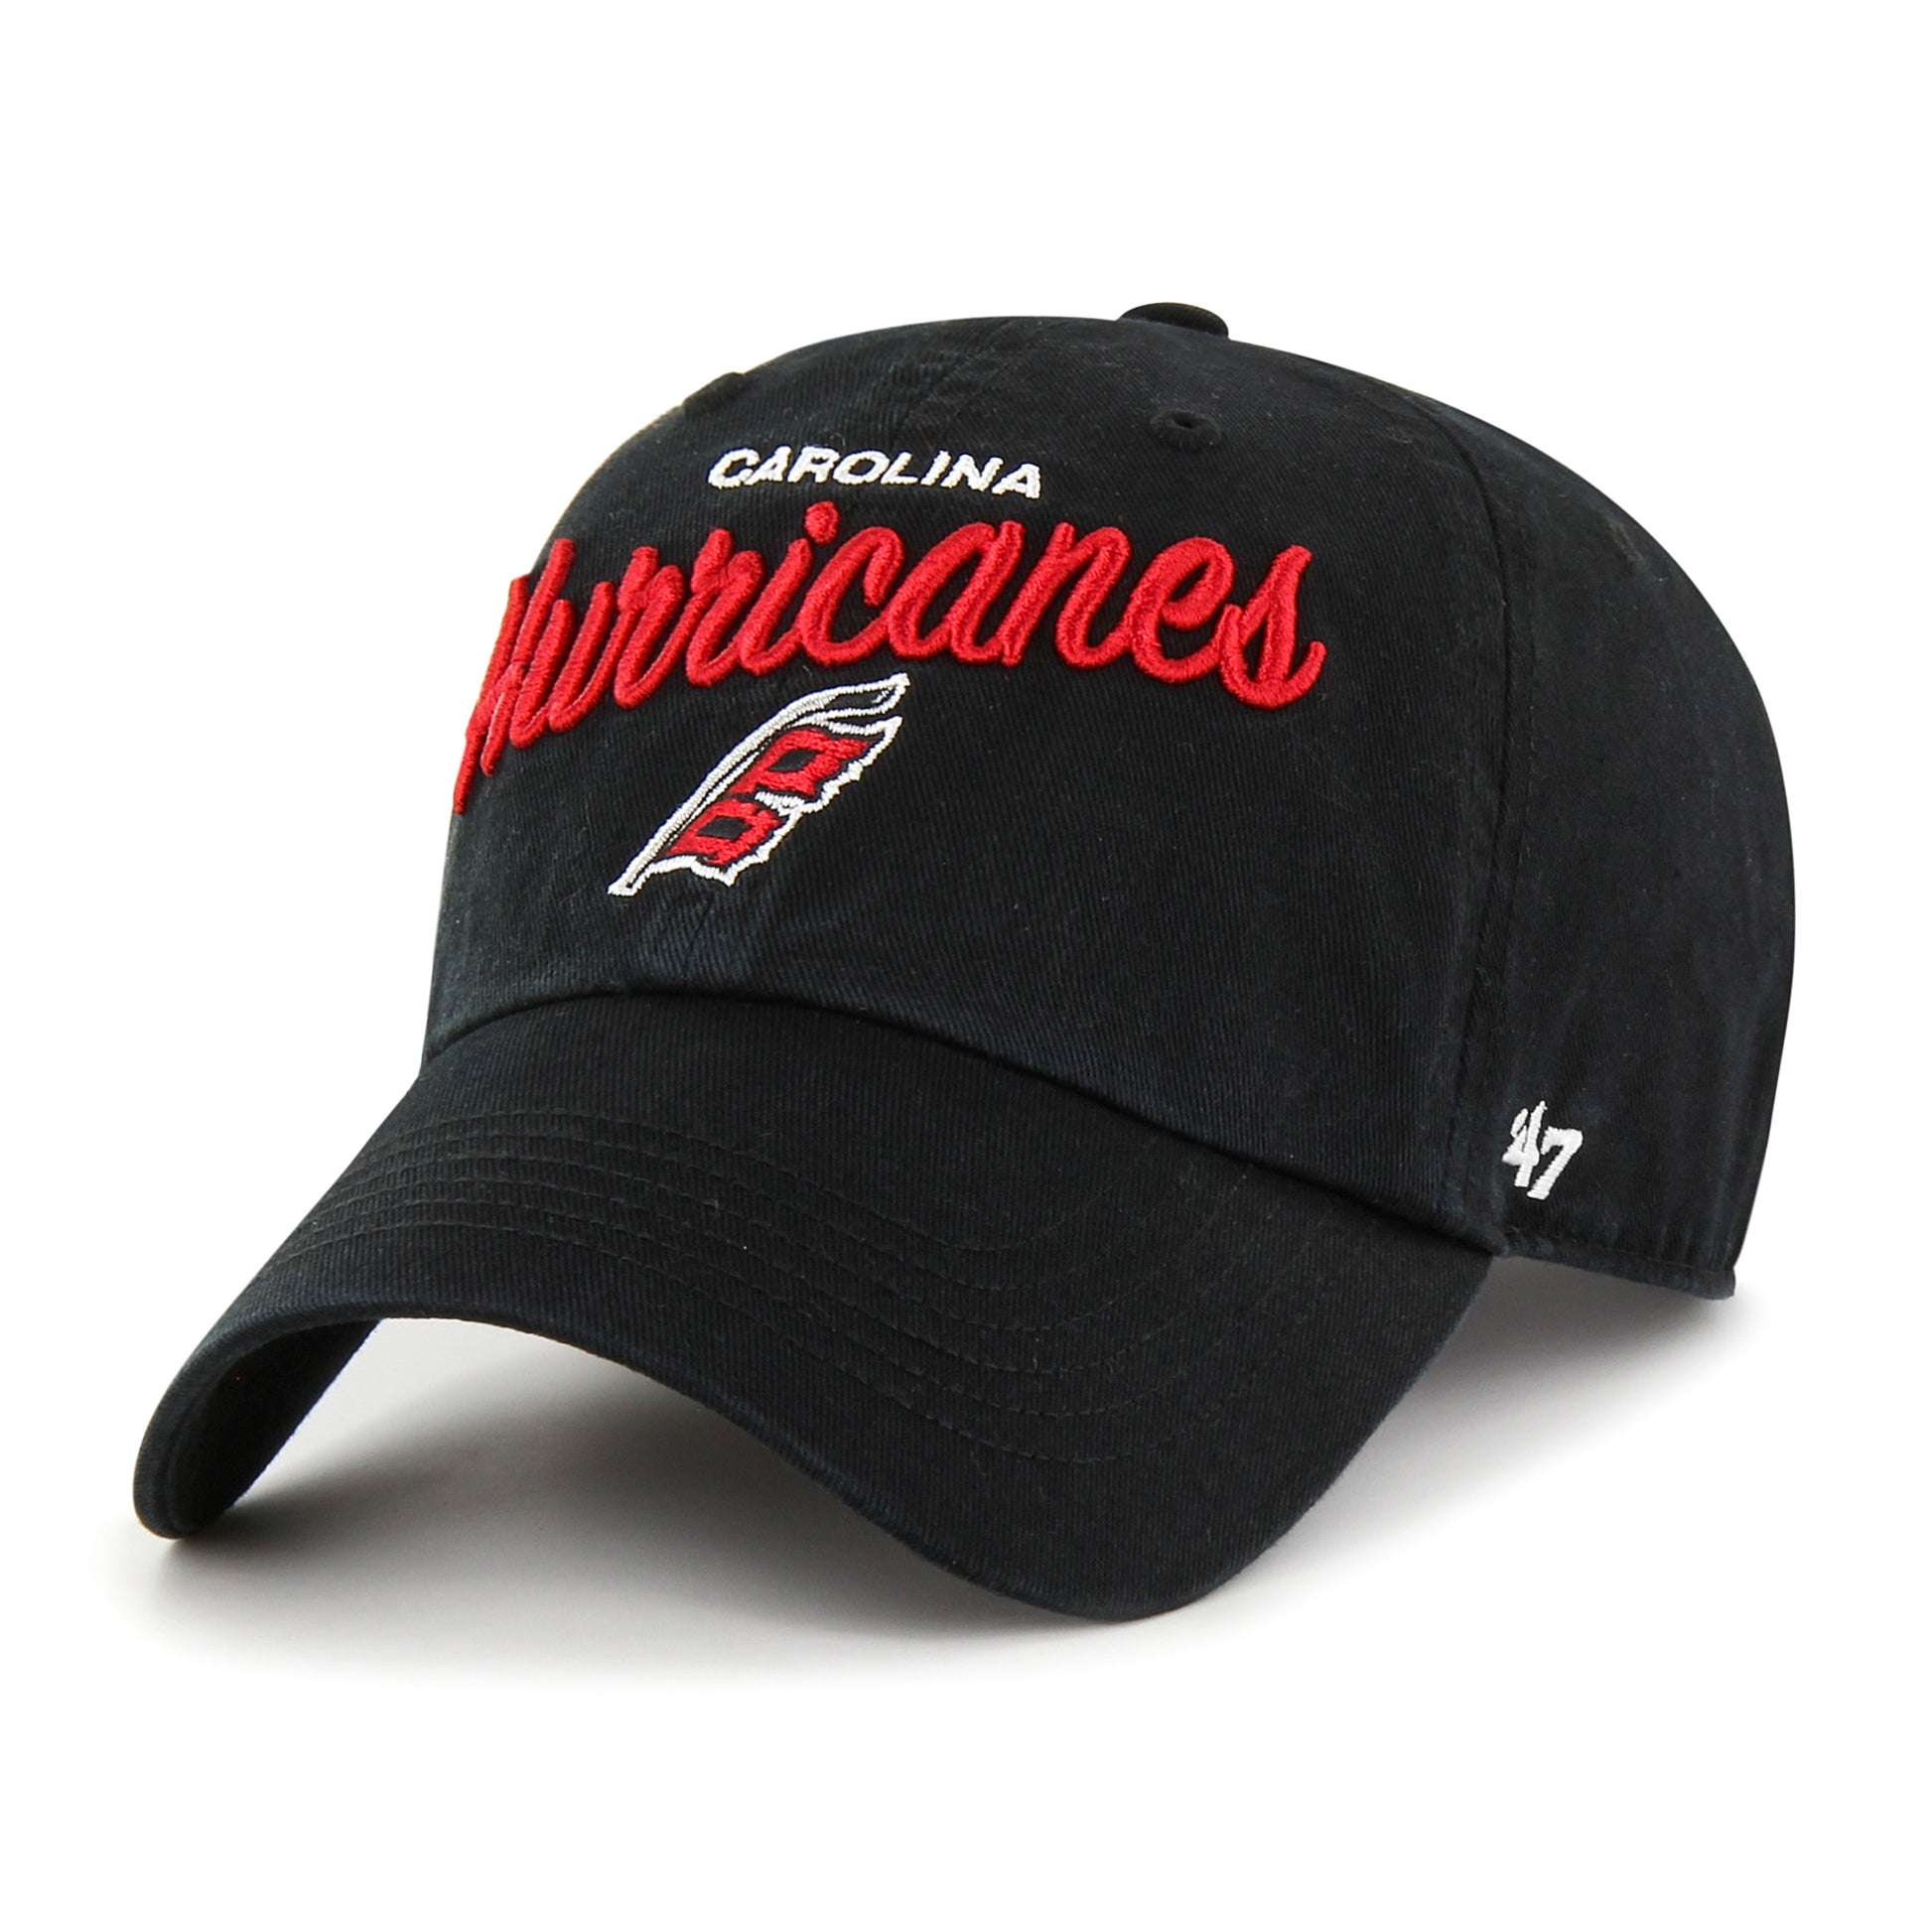 Front: Black hat with Carolina, Hurricanes in cursive with flag logo, 47 logo on side